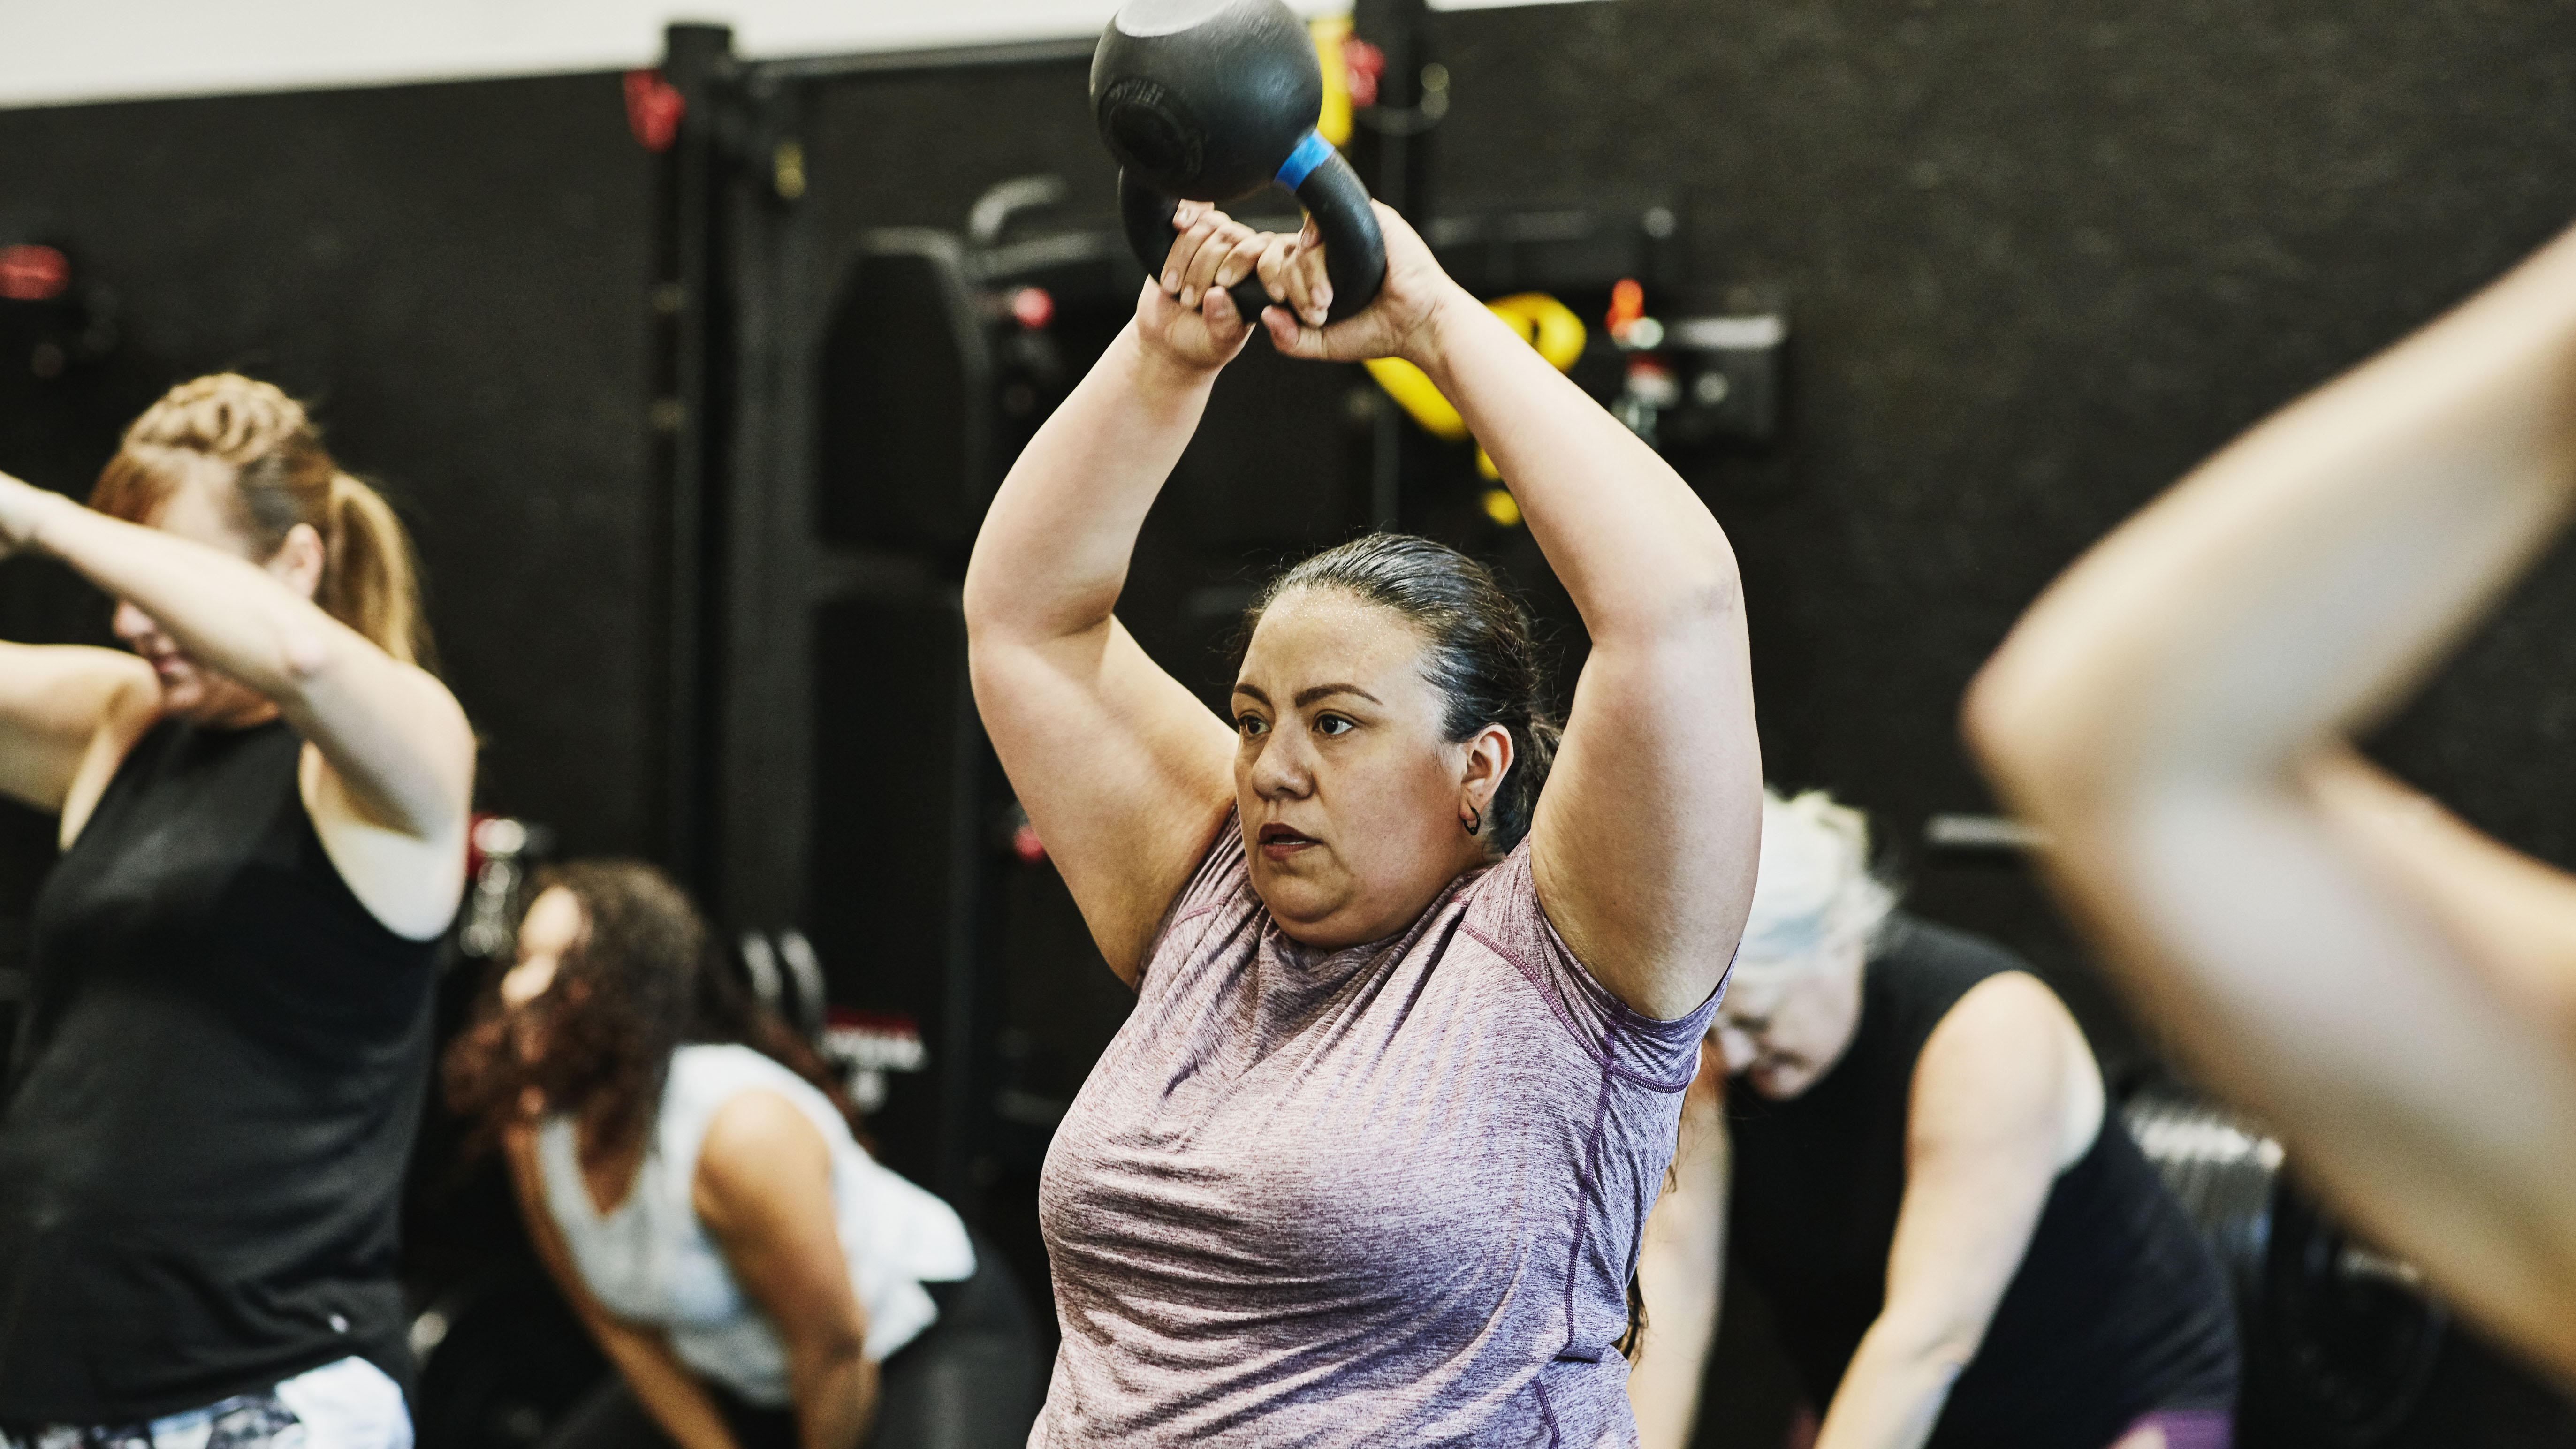 A woman swinging a kettlebell in the gym